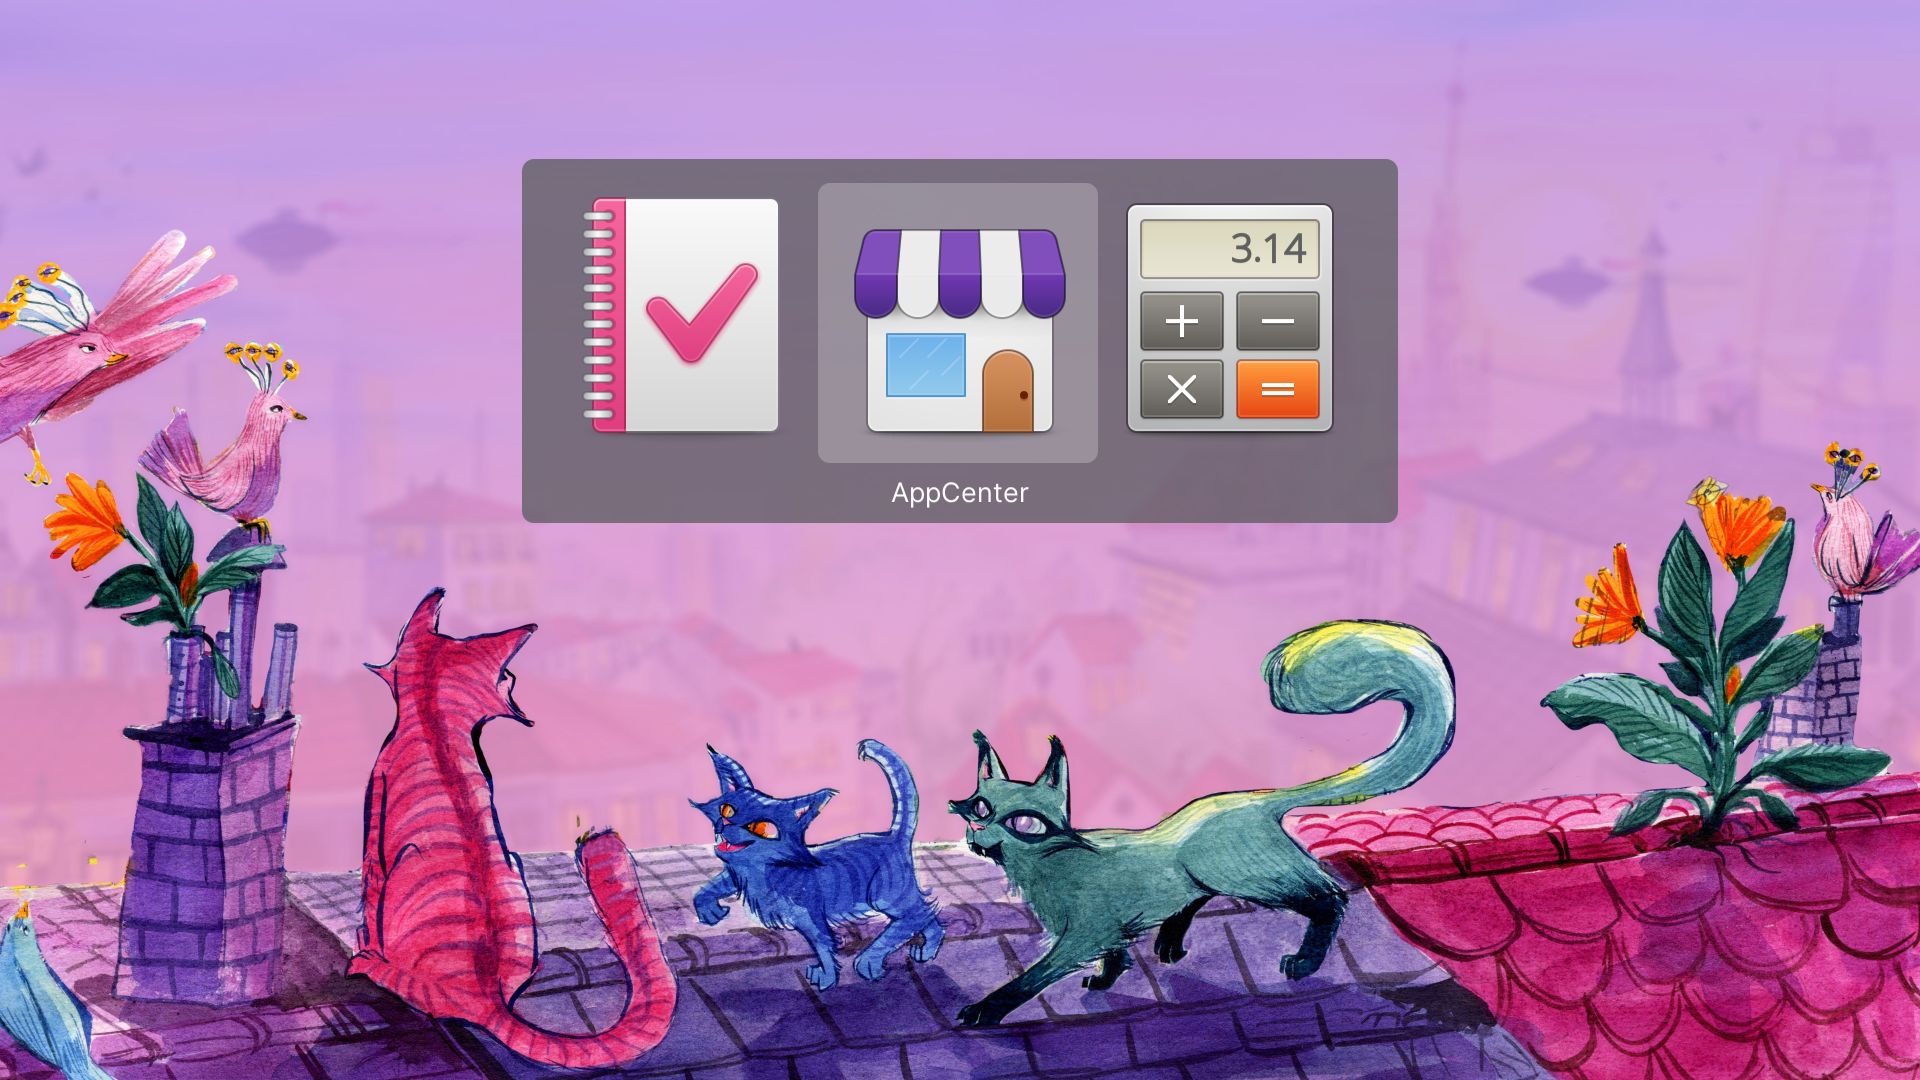 Screenshot of Catts in action. The switcher contains three icons: Tasks, AppCenter, and Calculator. AppCenter is selected. The switcher is in dark mode. The wallpaper behind the switcher is an illustration of cats on a roof. One (pink) looks out into the distance, a tiny blue one is about to paw its tail playfully, and a green one watches the scene.